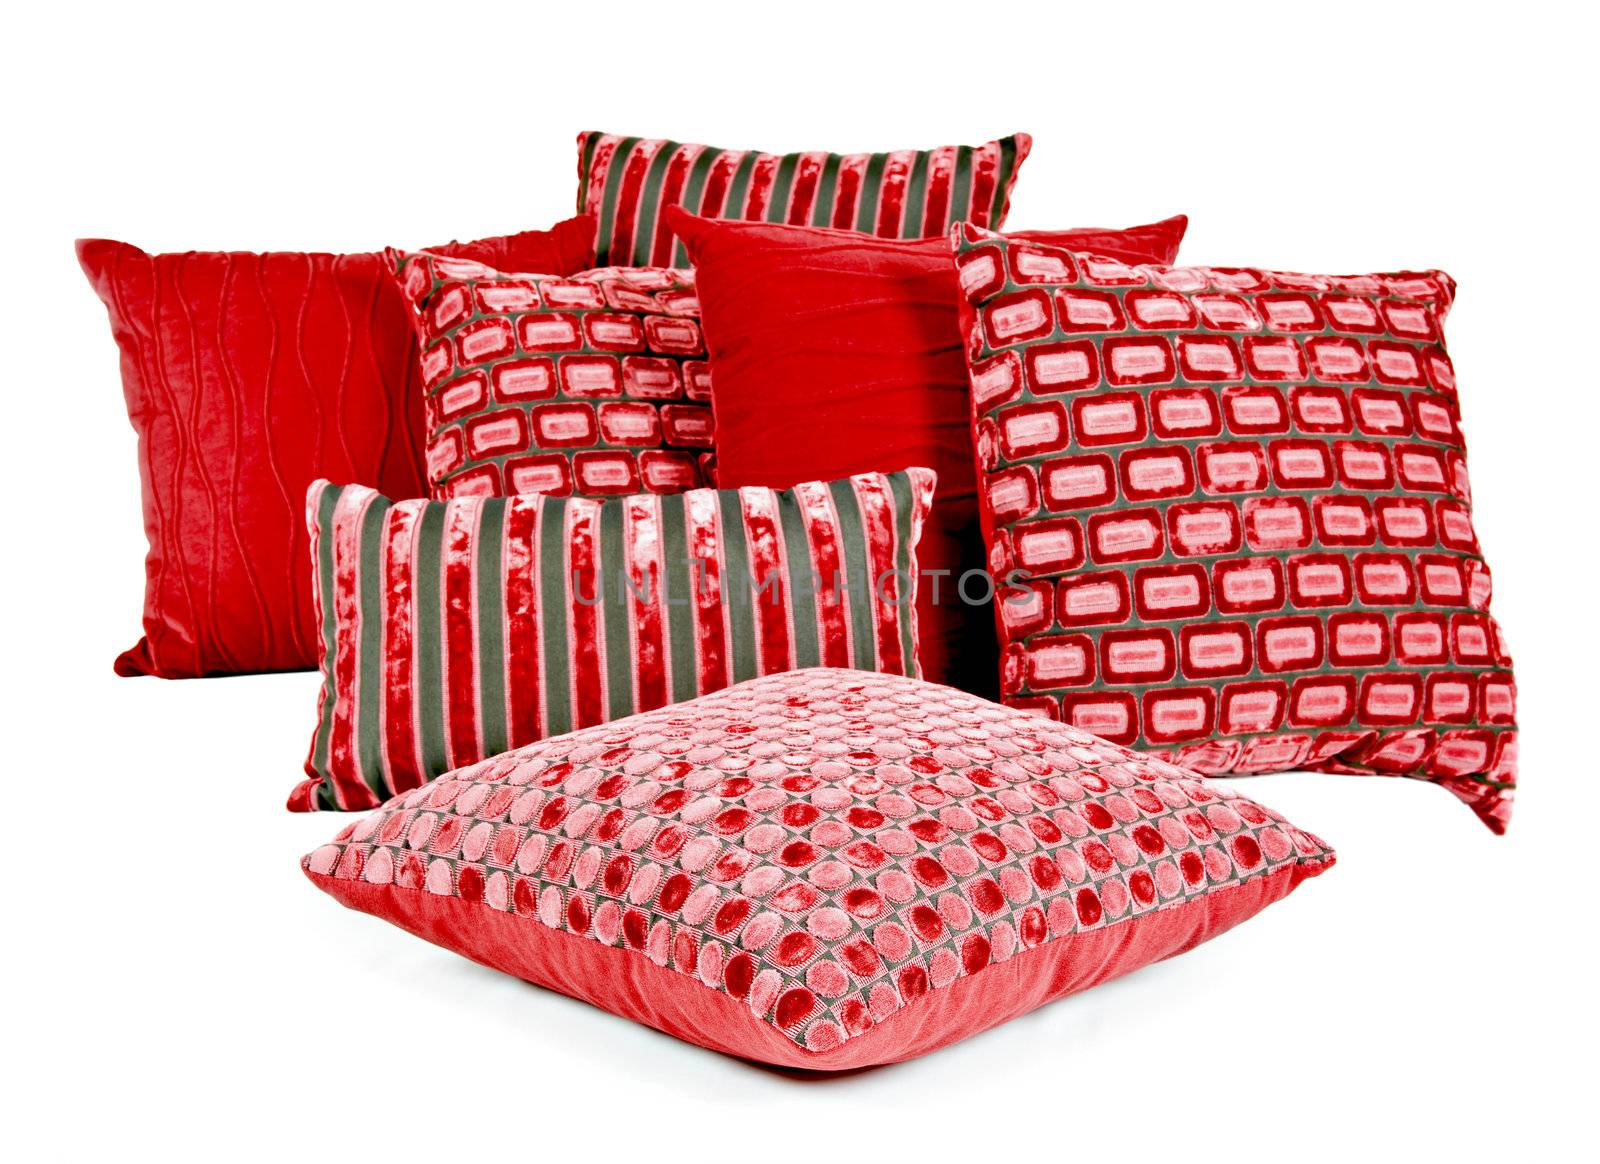 Combination of red and brown pillows on a white background by tish1